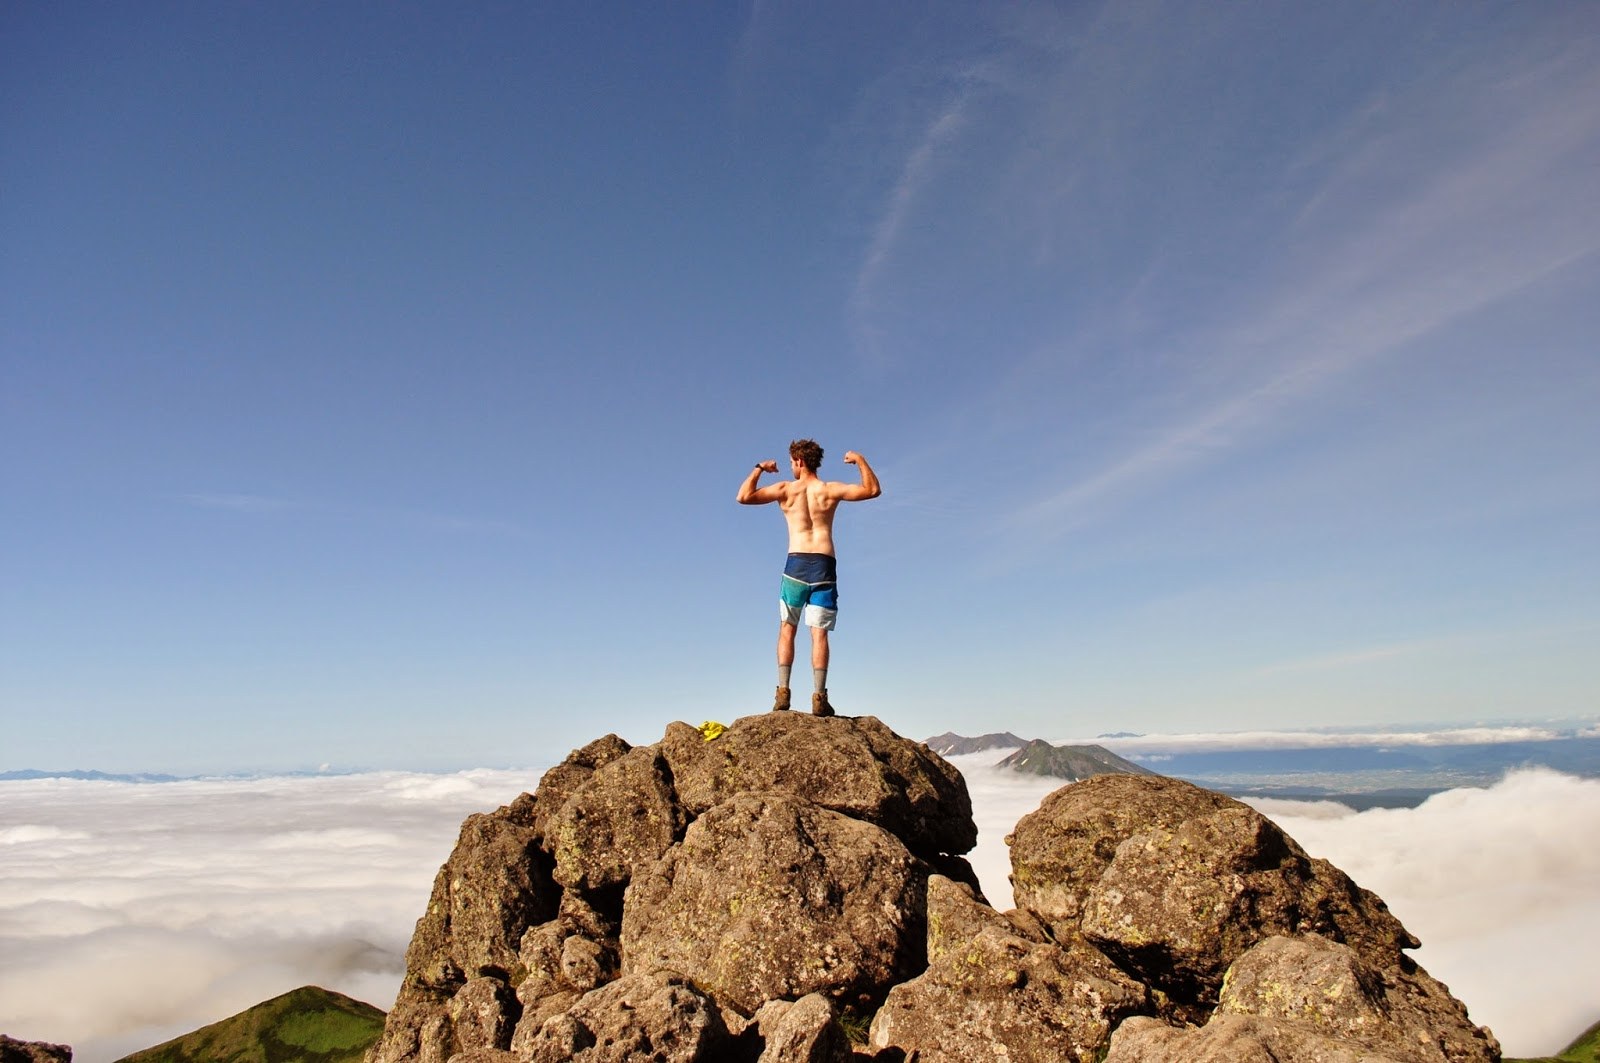 Flexing my arms and back, standing on the summit of the mountain, facing away from the camera, looking very dramatic